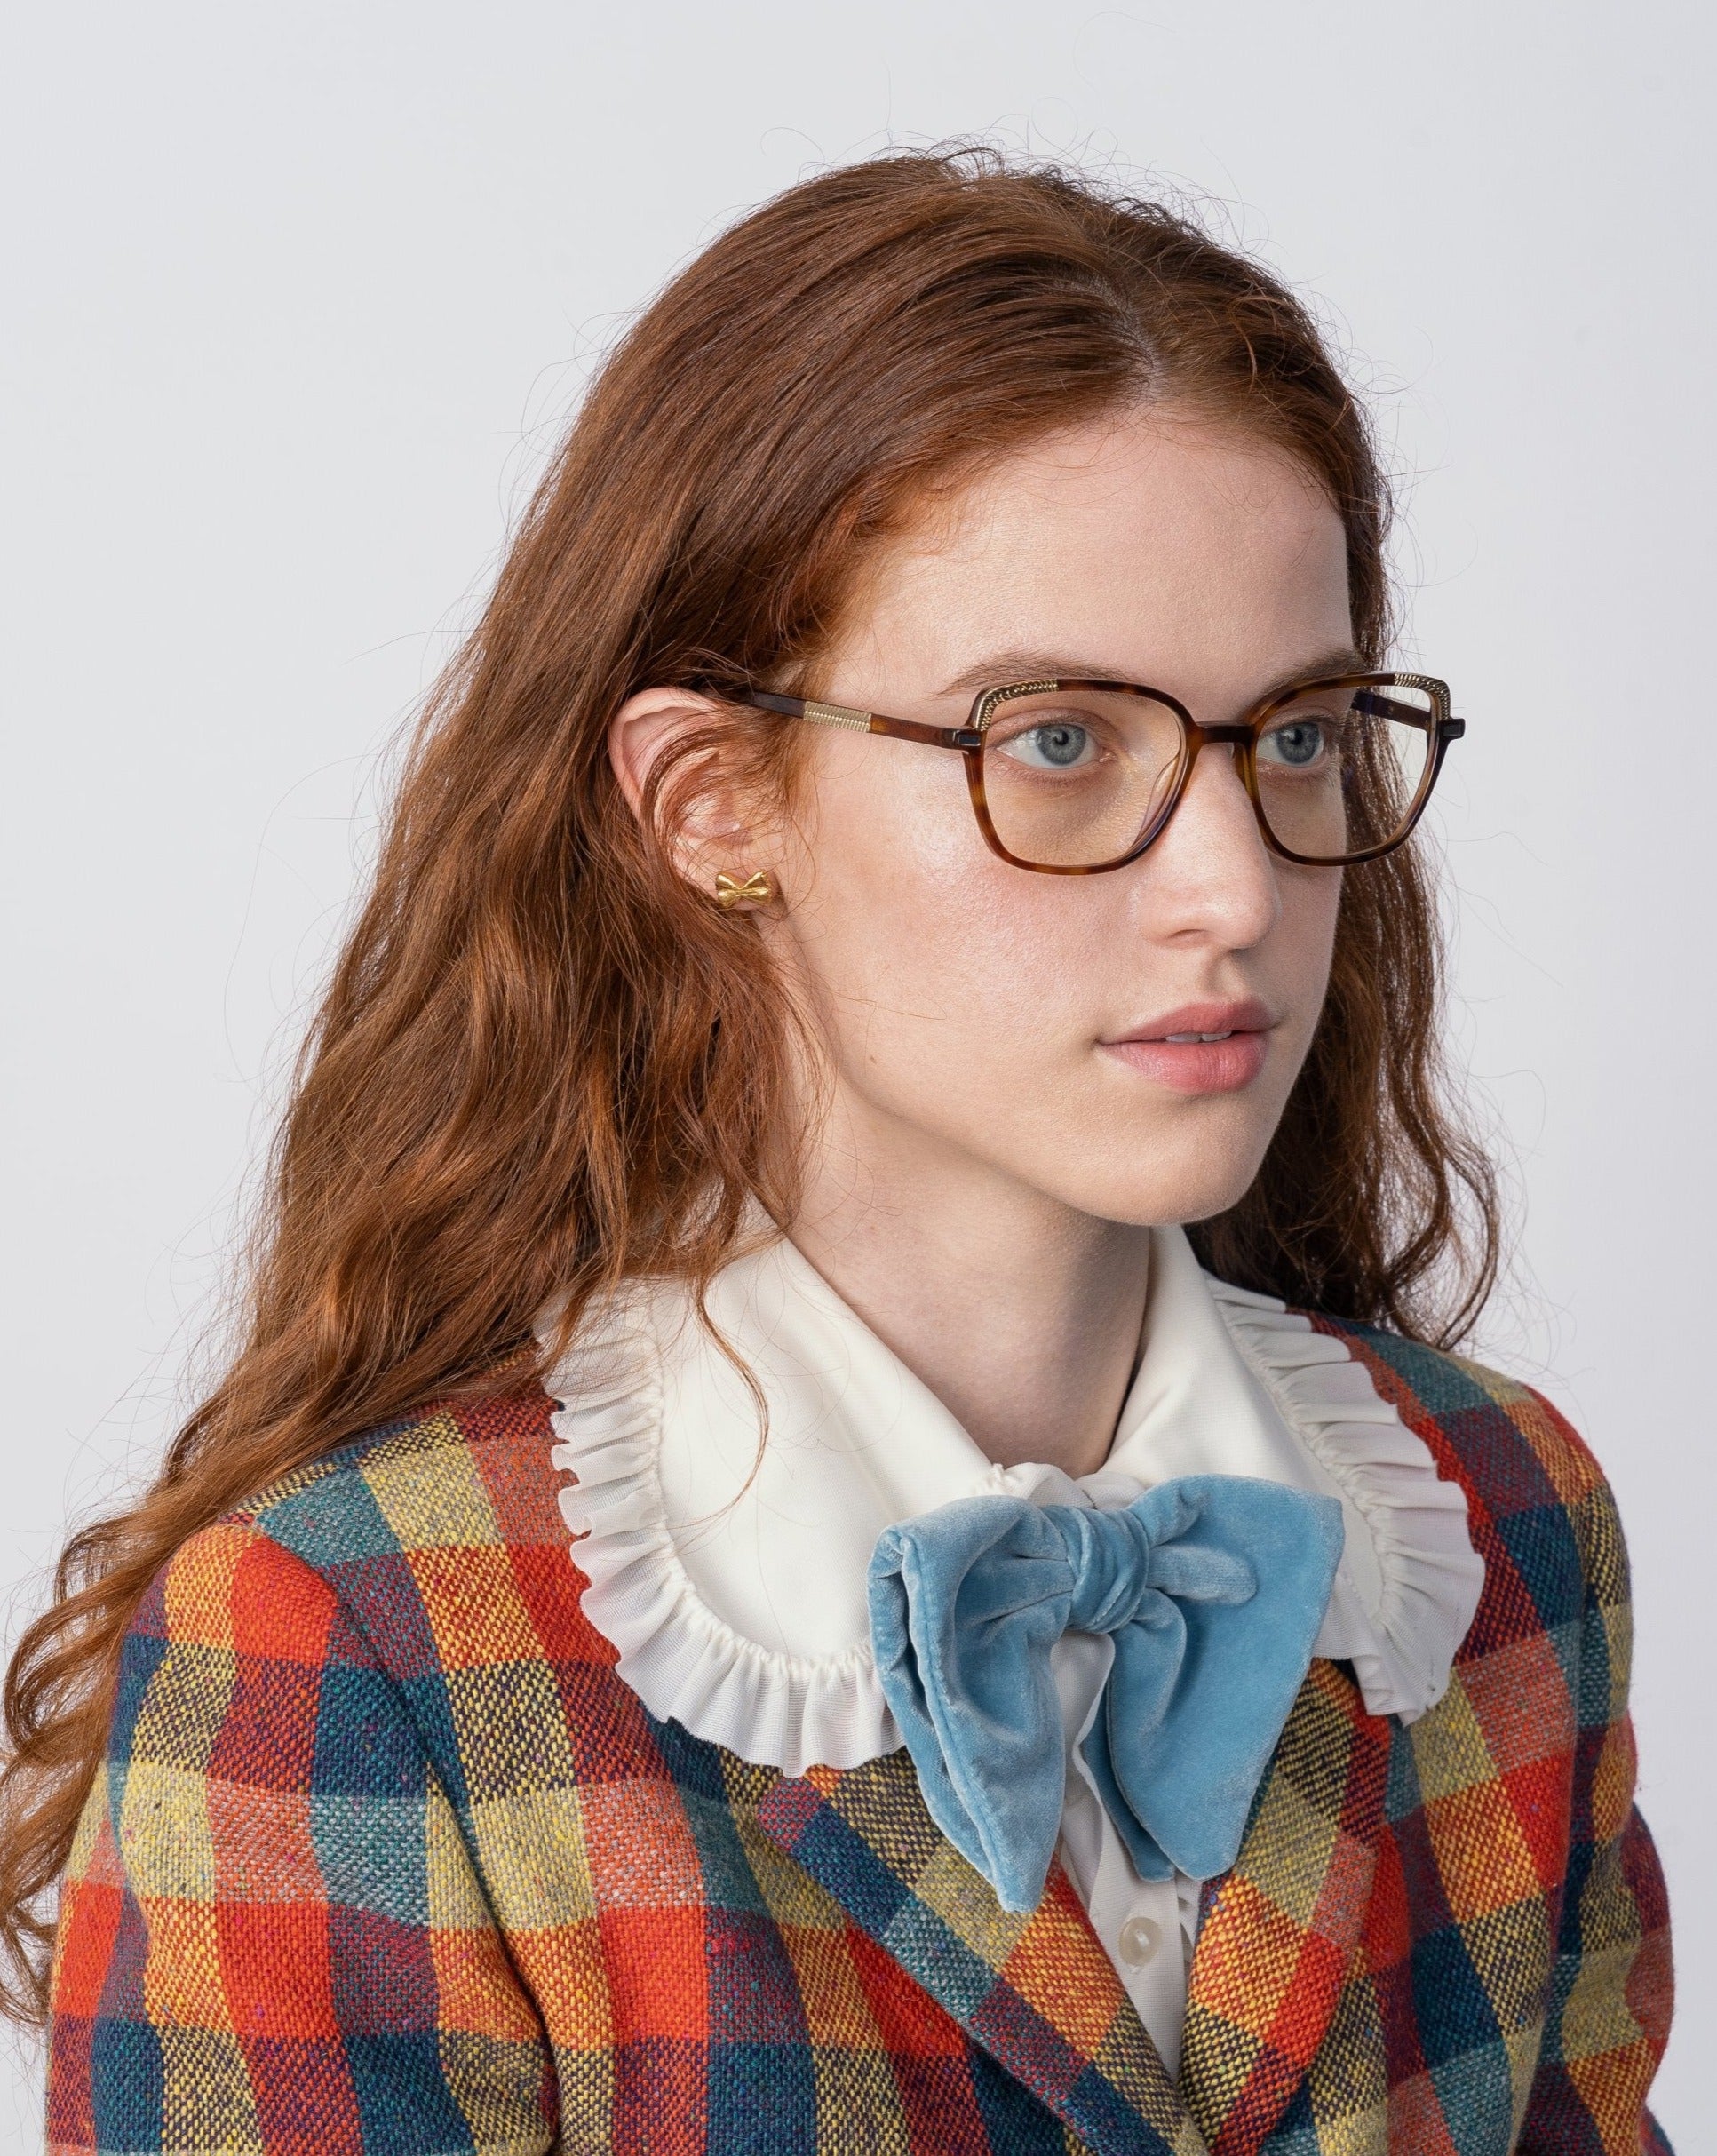 A woman with long red hair and glasses featuring Mimosa by For Art&#39;s Sake® lenses is wearing a colorful plaid jacket with a white ruffled collar shirt and a large light blue bow tie. She is looking slightly to the left against a plain white background.